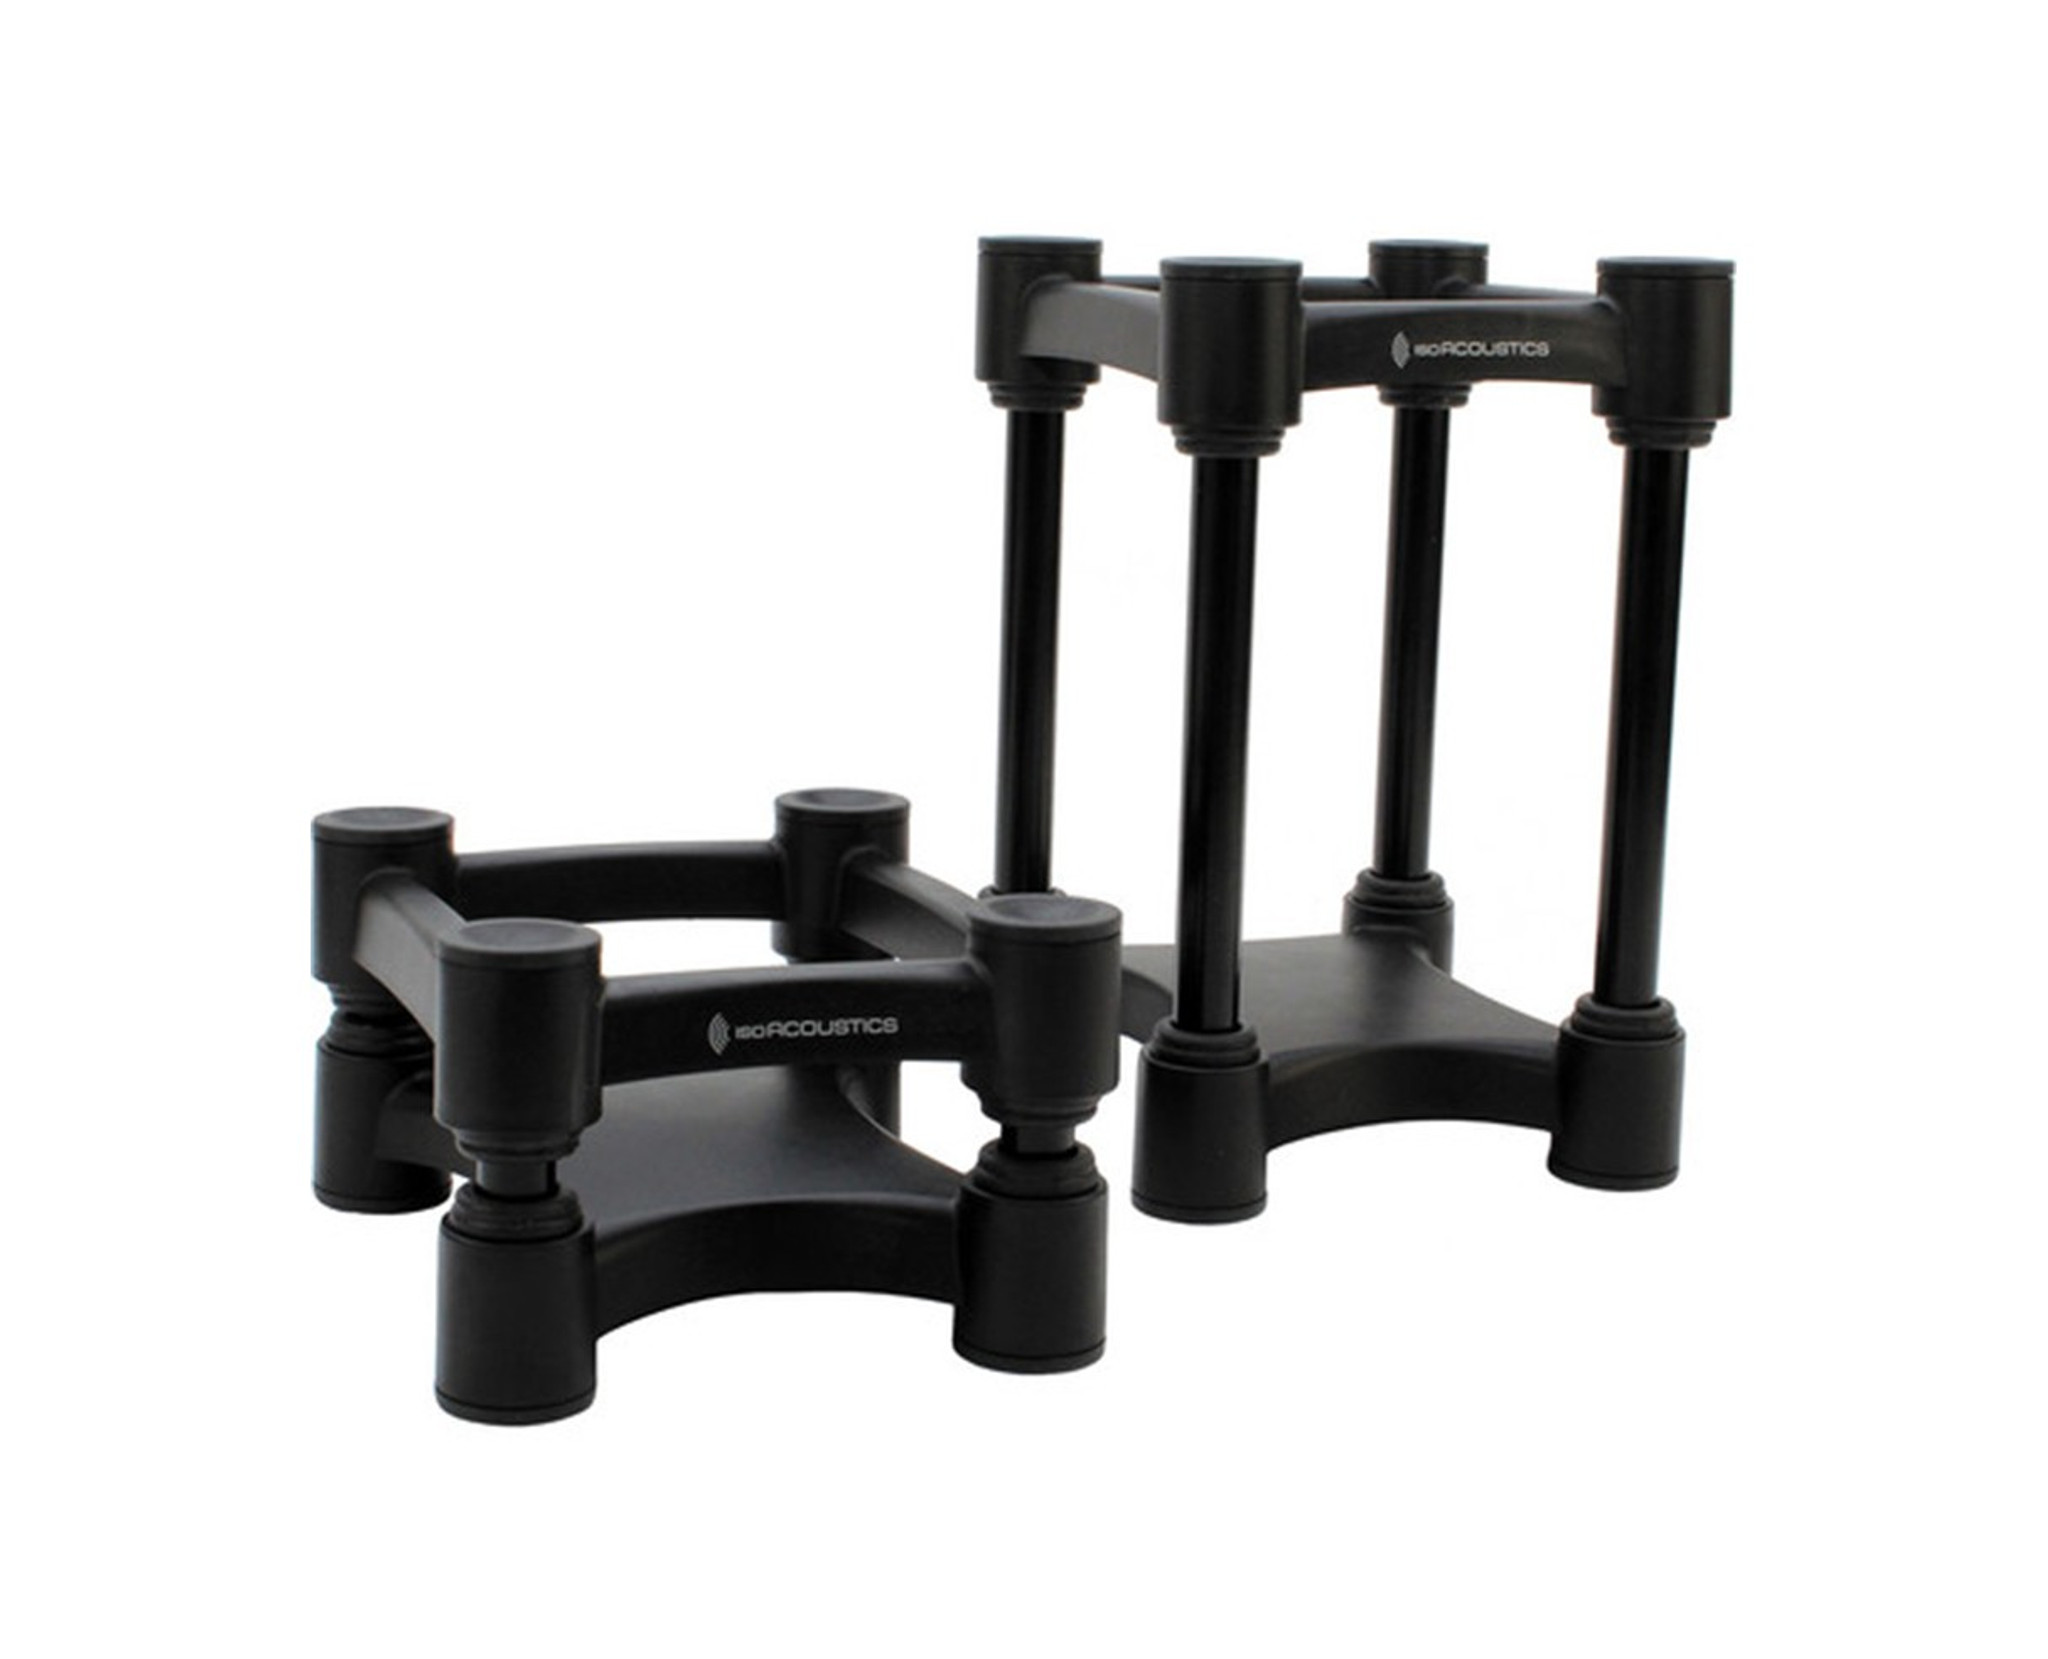 IsoAcoustics ISO-130 Studio Monitor Stands (Pair)